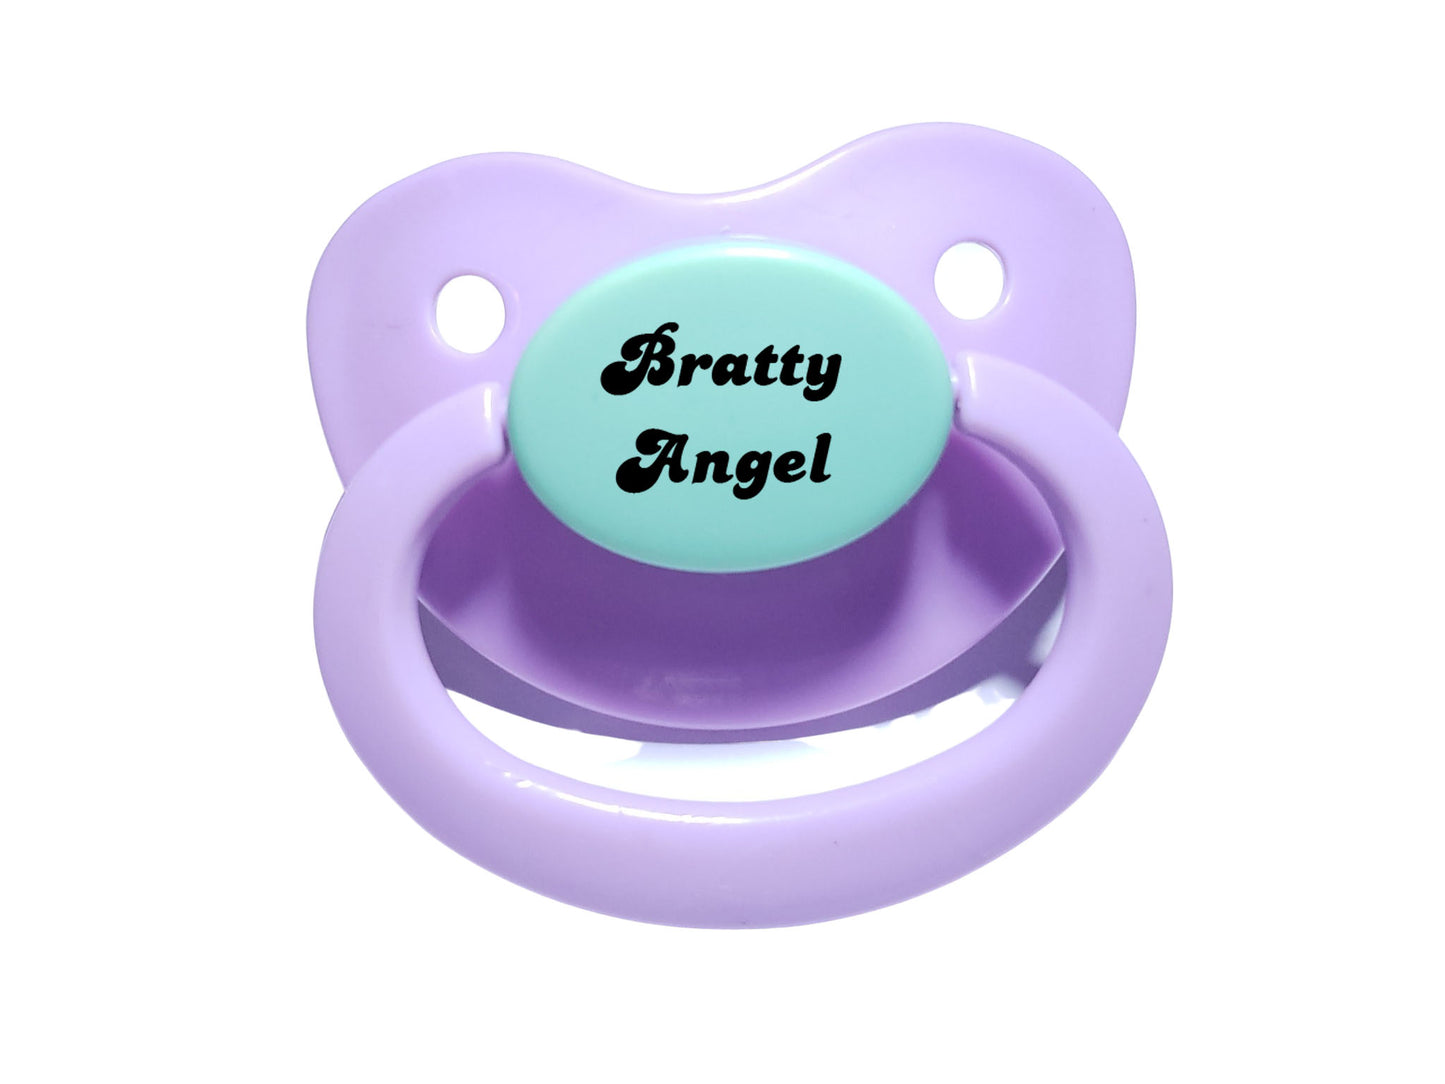 Bratty Angel Adult Pacifier